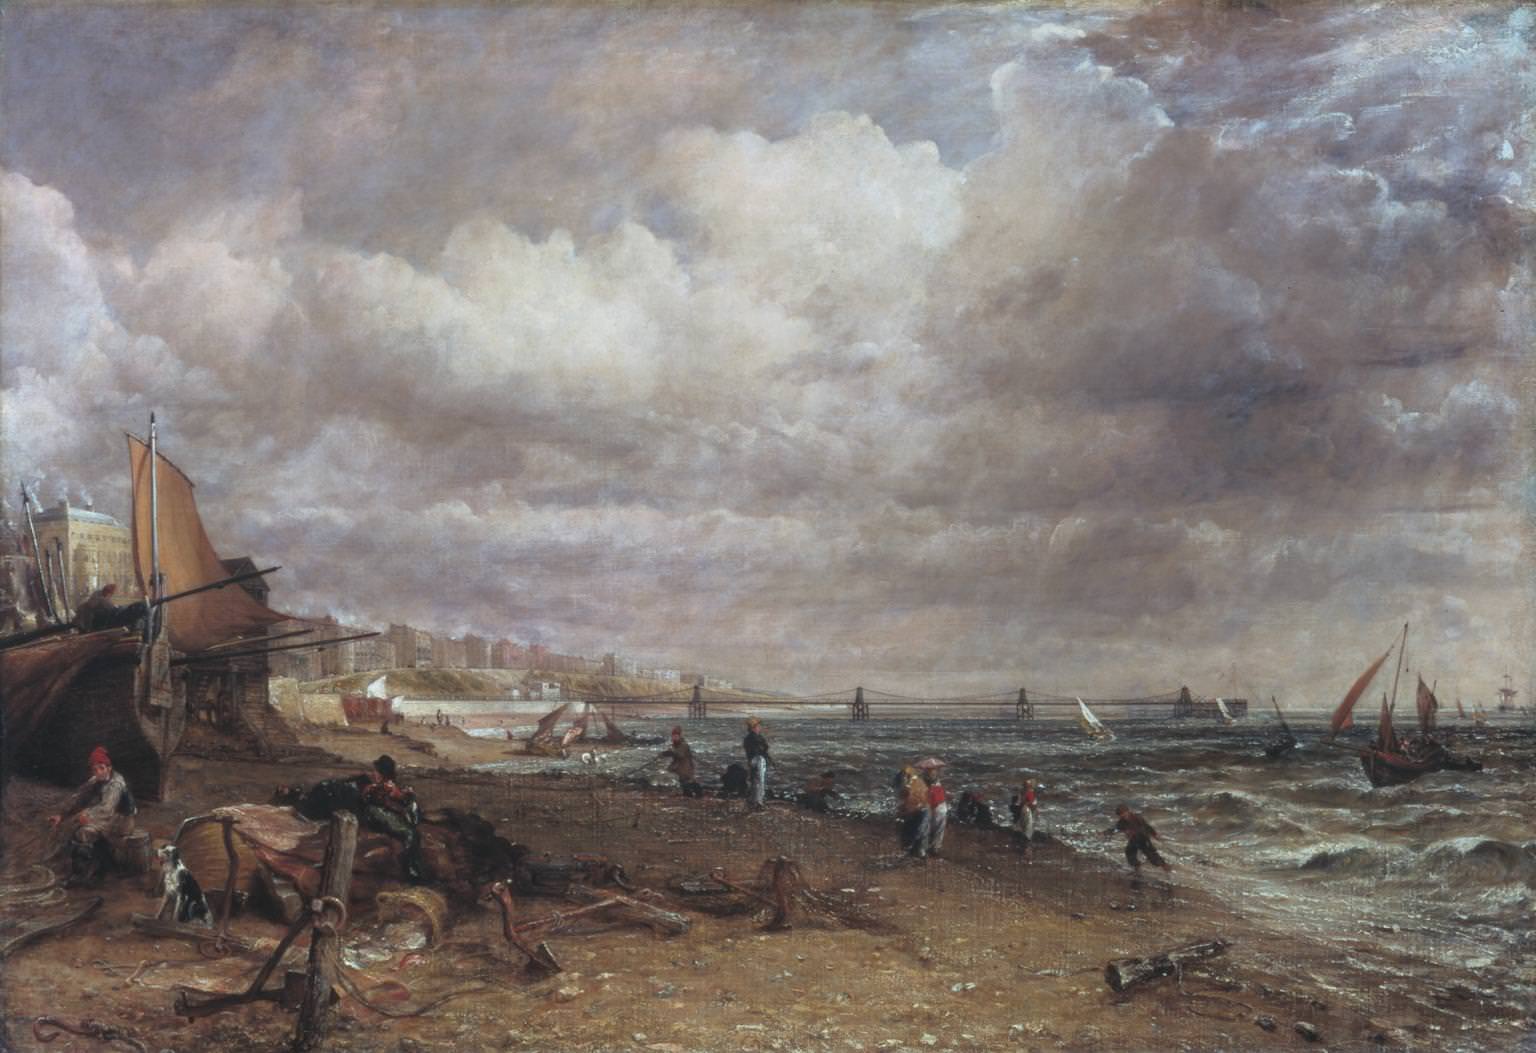 1826–7, oil on canvas, 127 × 182.9 cm. Collection of Tate (N05957).